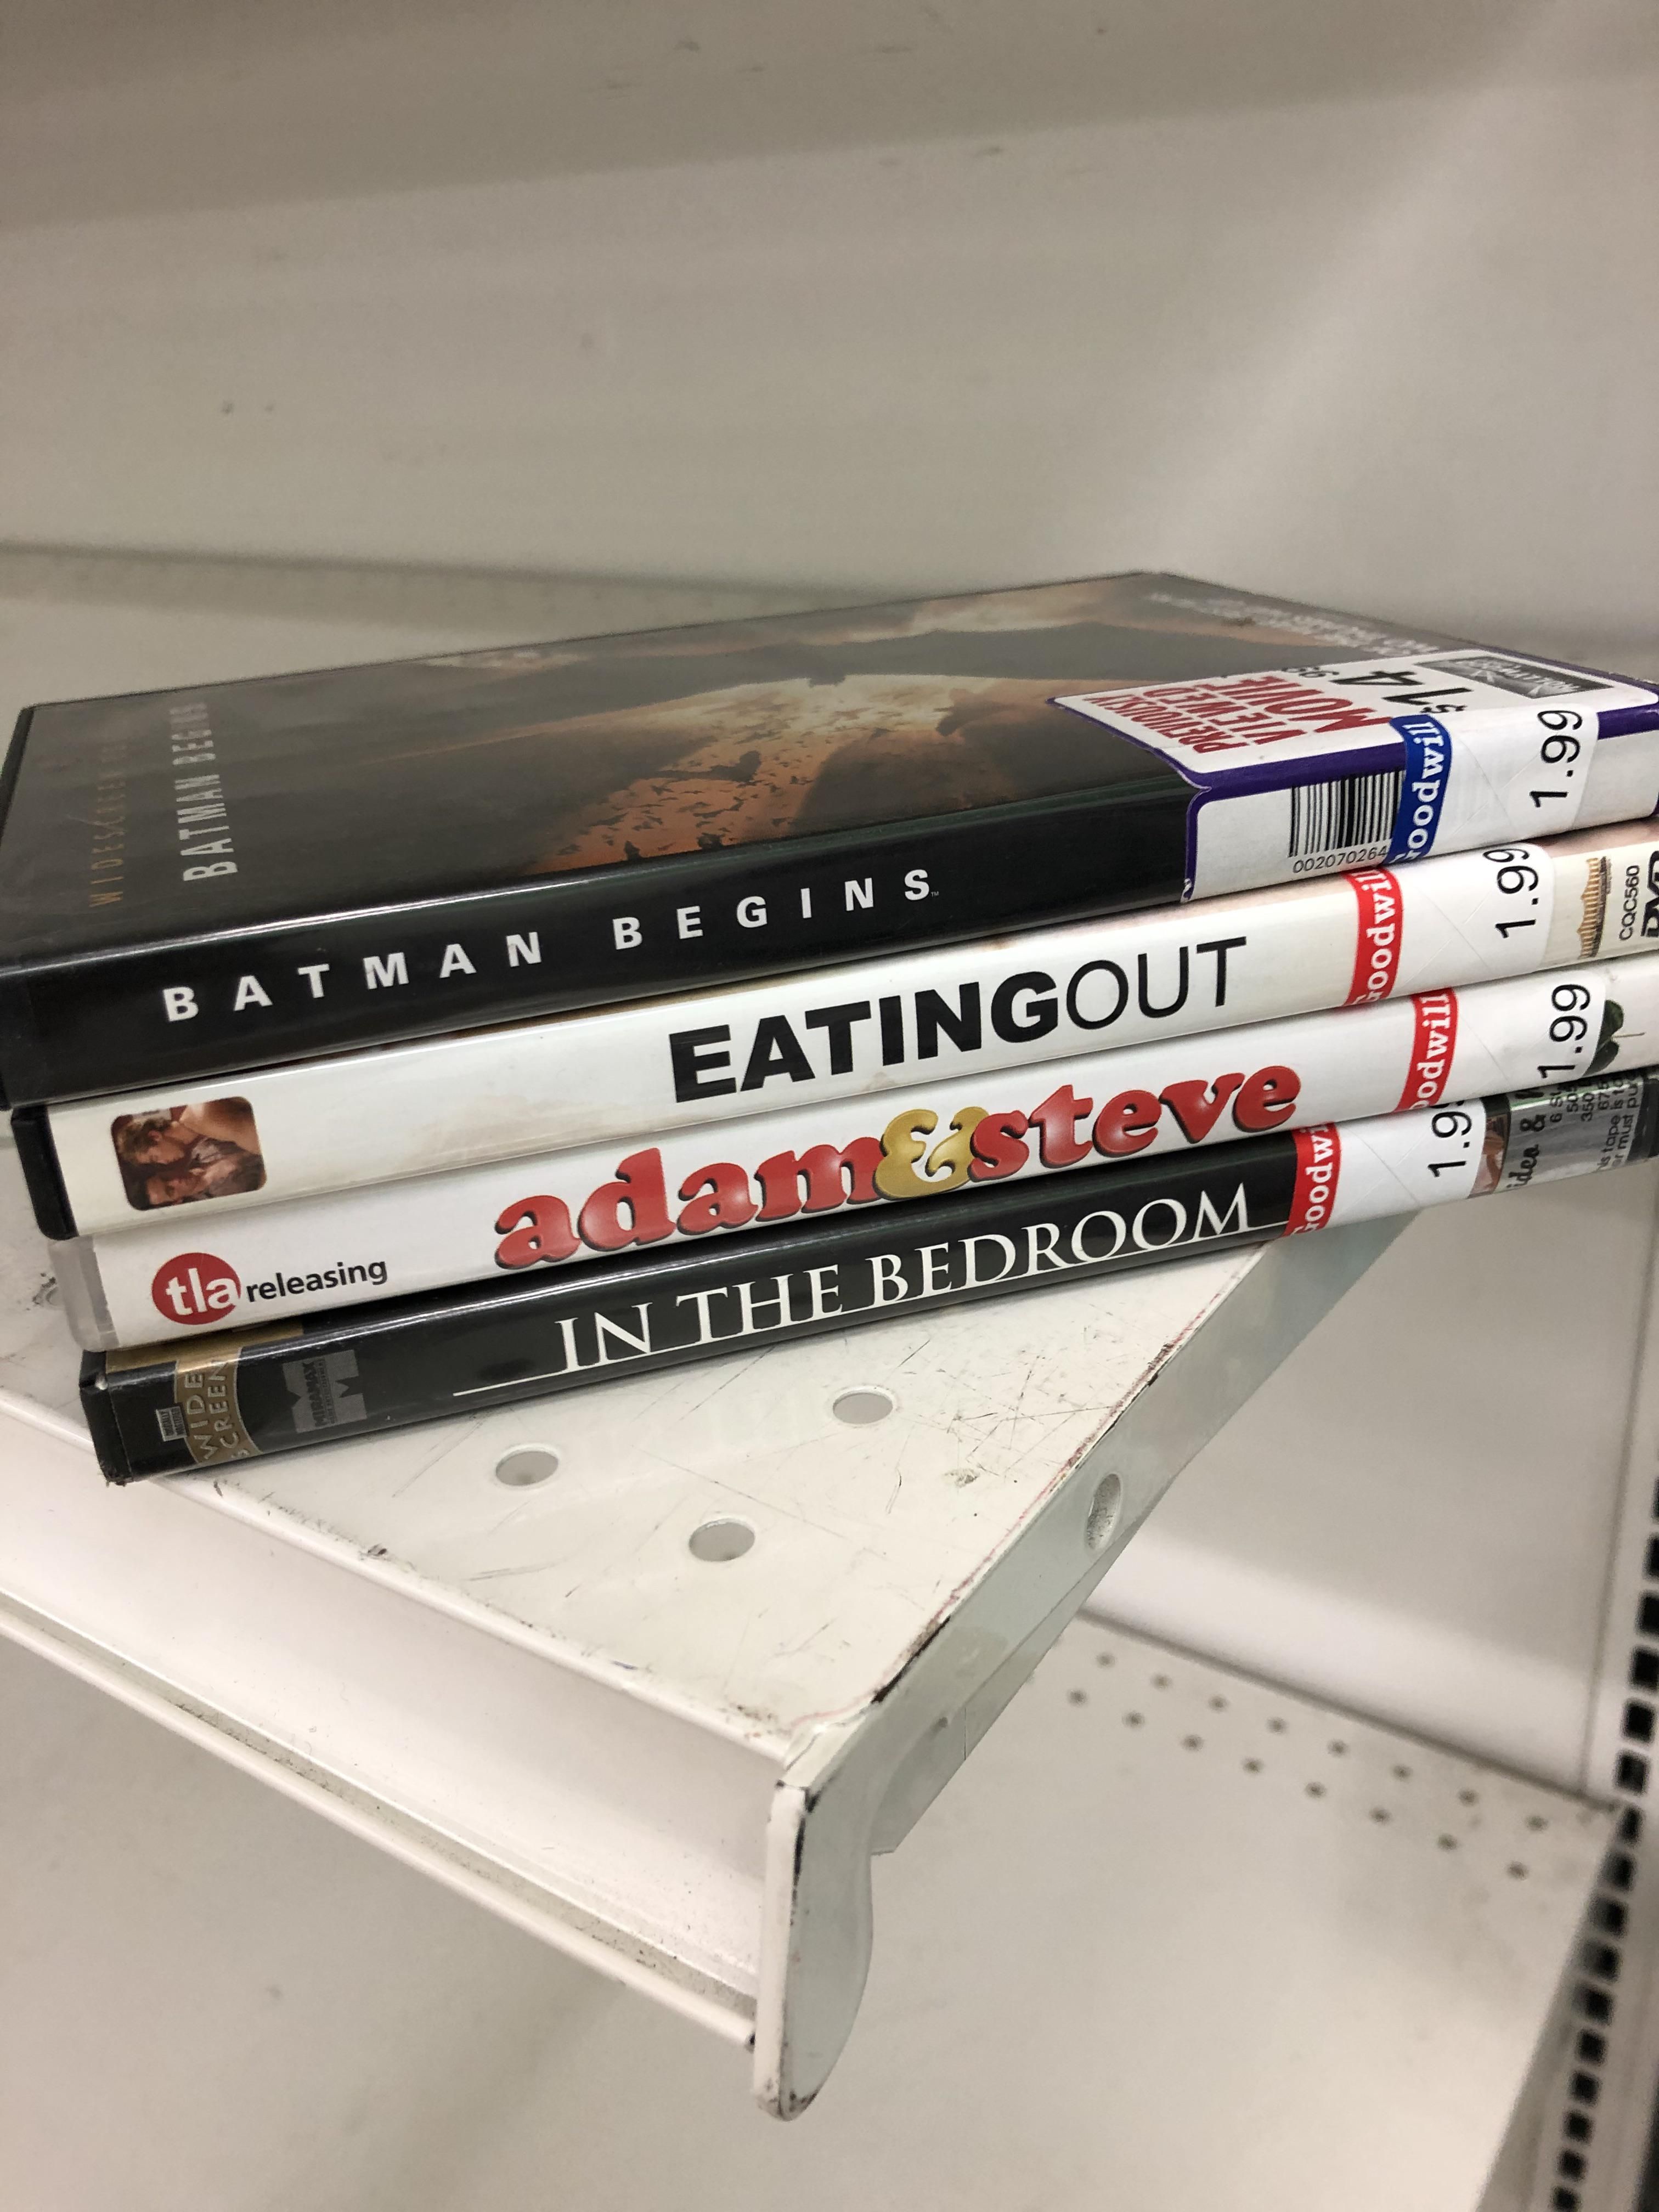 I love rearranging movie titles at the thrift store.